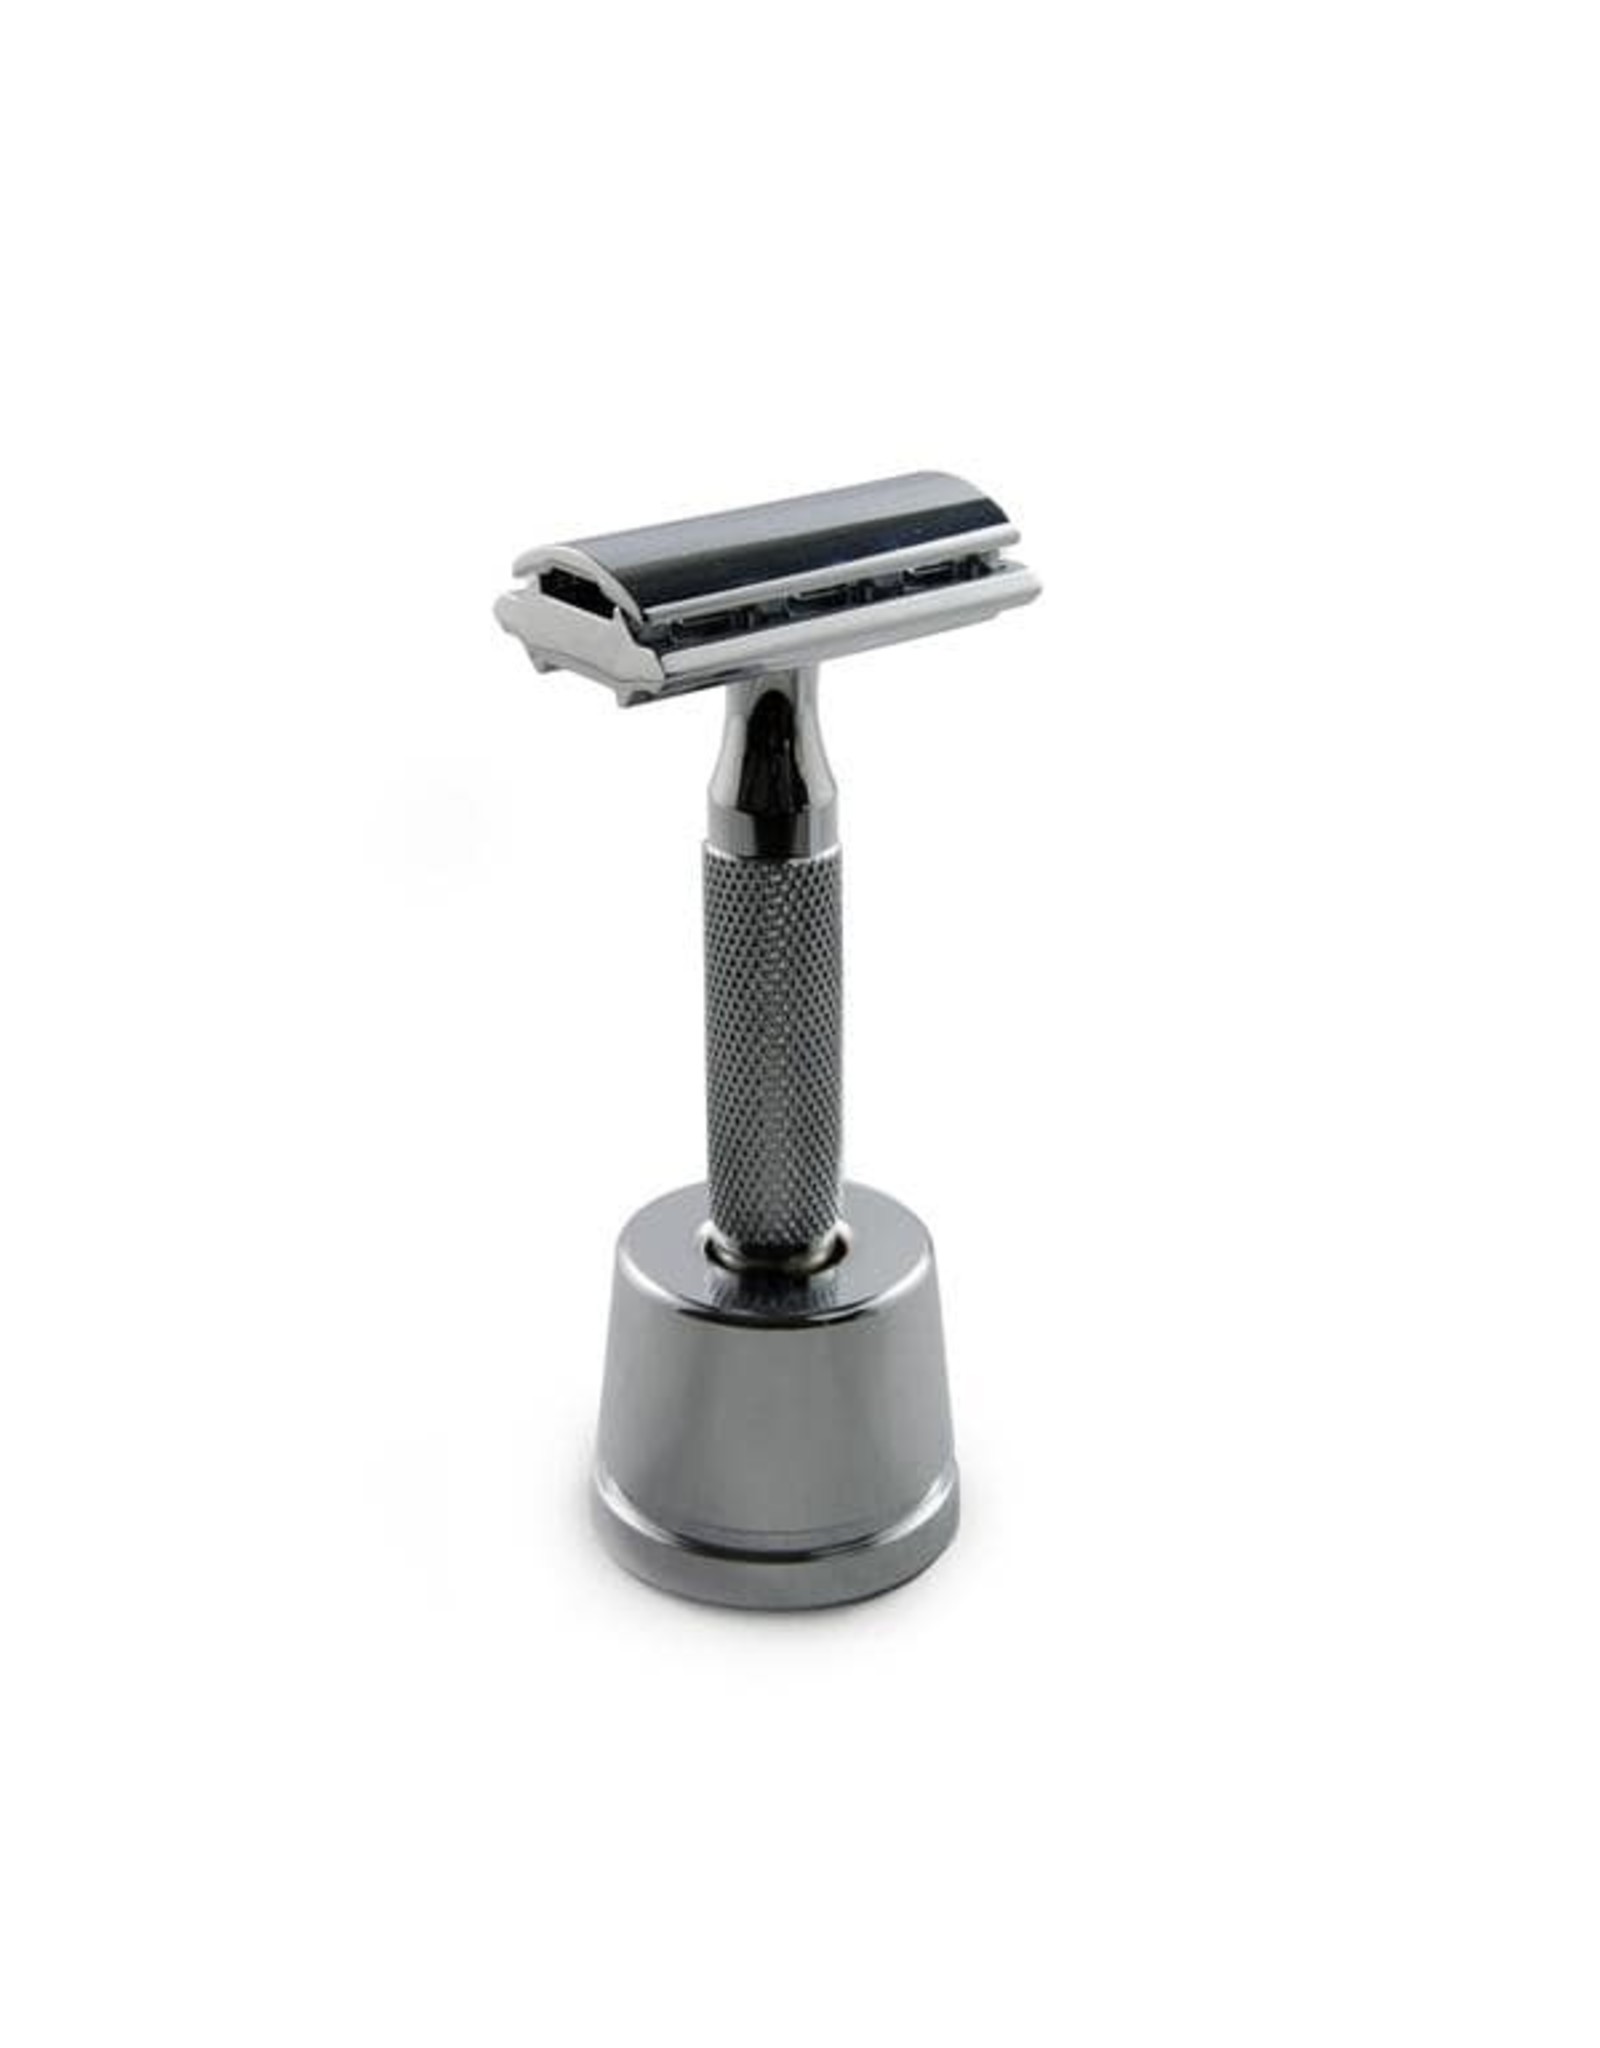 Rockwell Originals Inkwell-style Razor Stand by Rockwell Originals